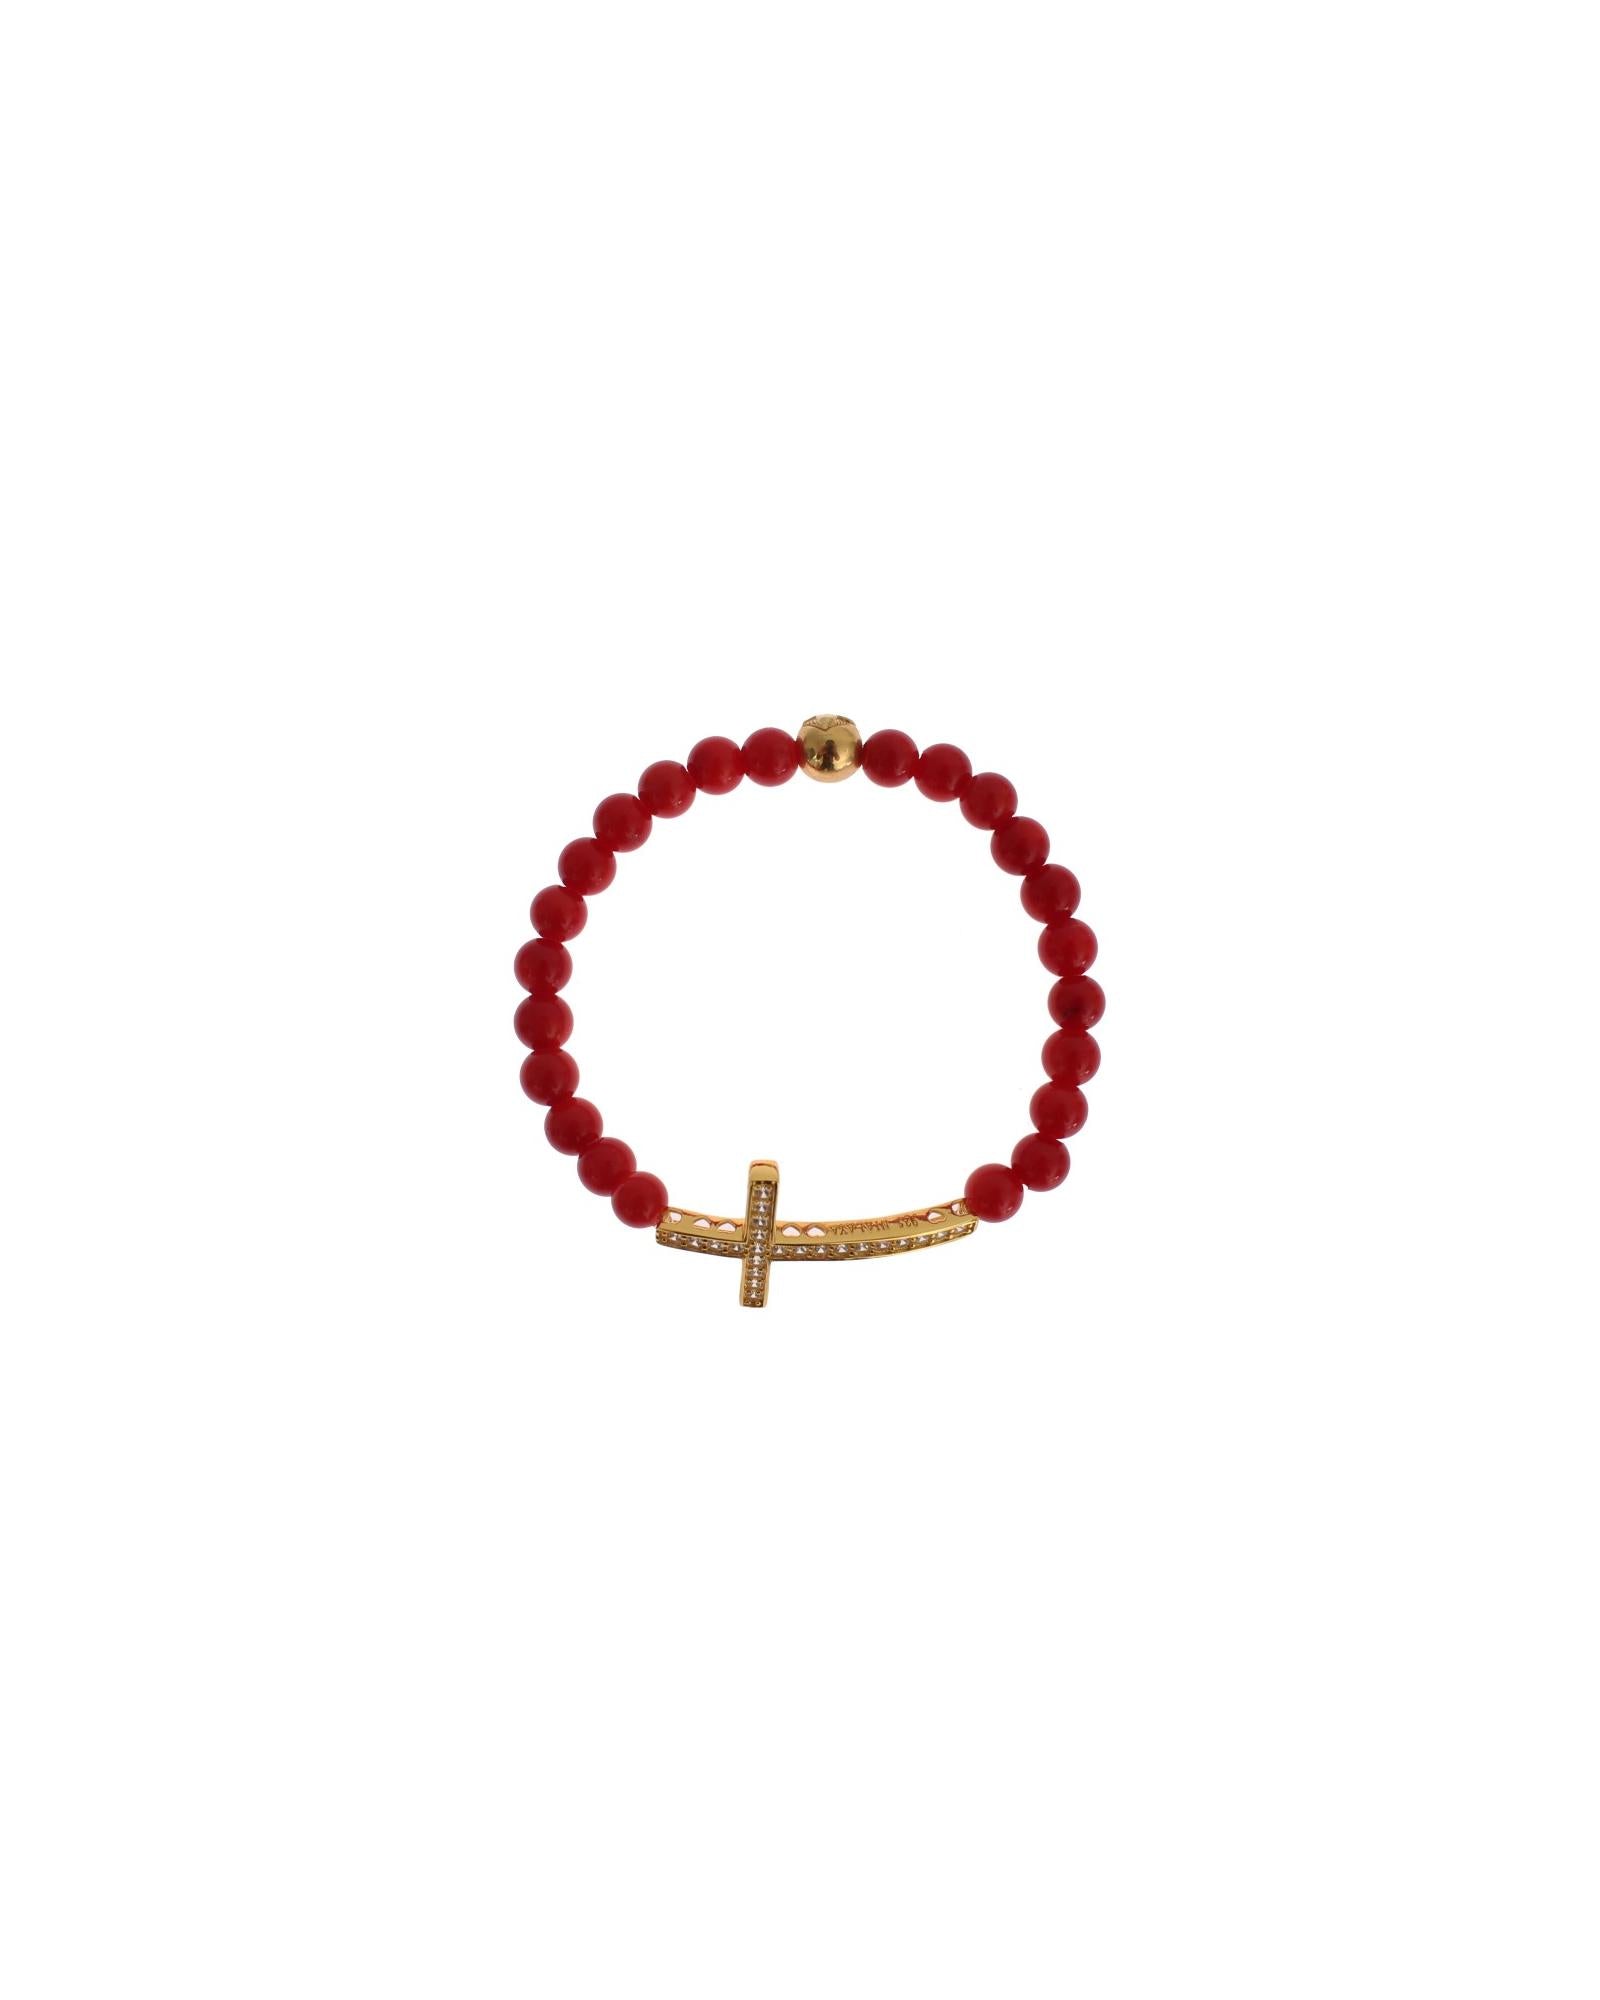 Authentic  Gold Plated Silver Bracelet with Red Coral Beads and CZ Diamond Cross M Women